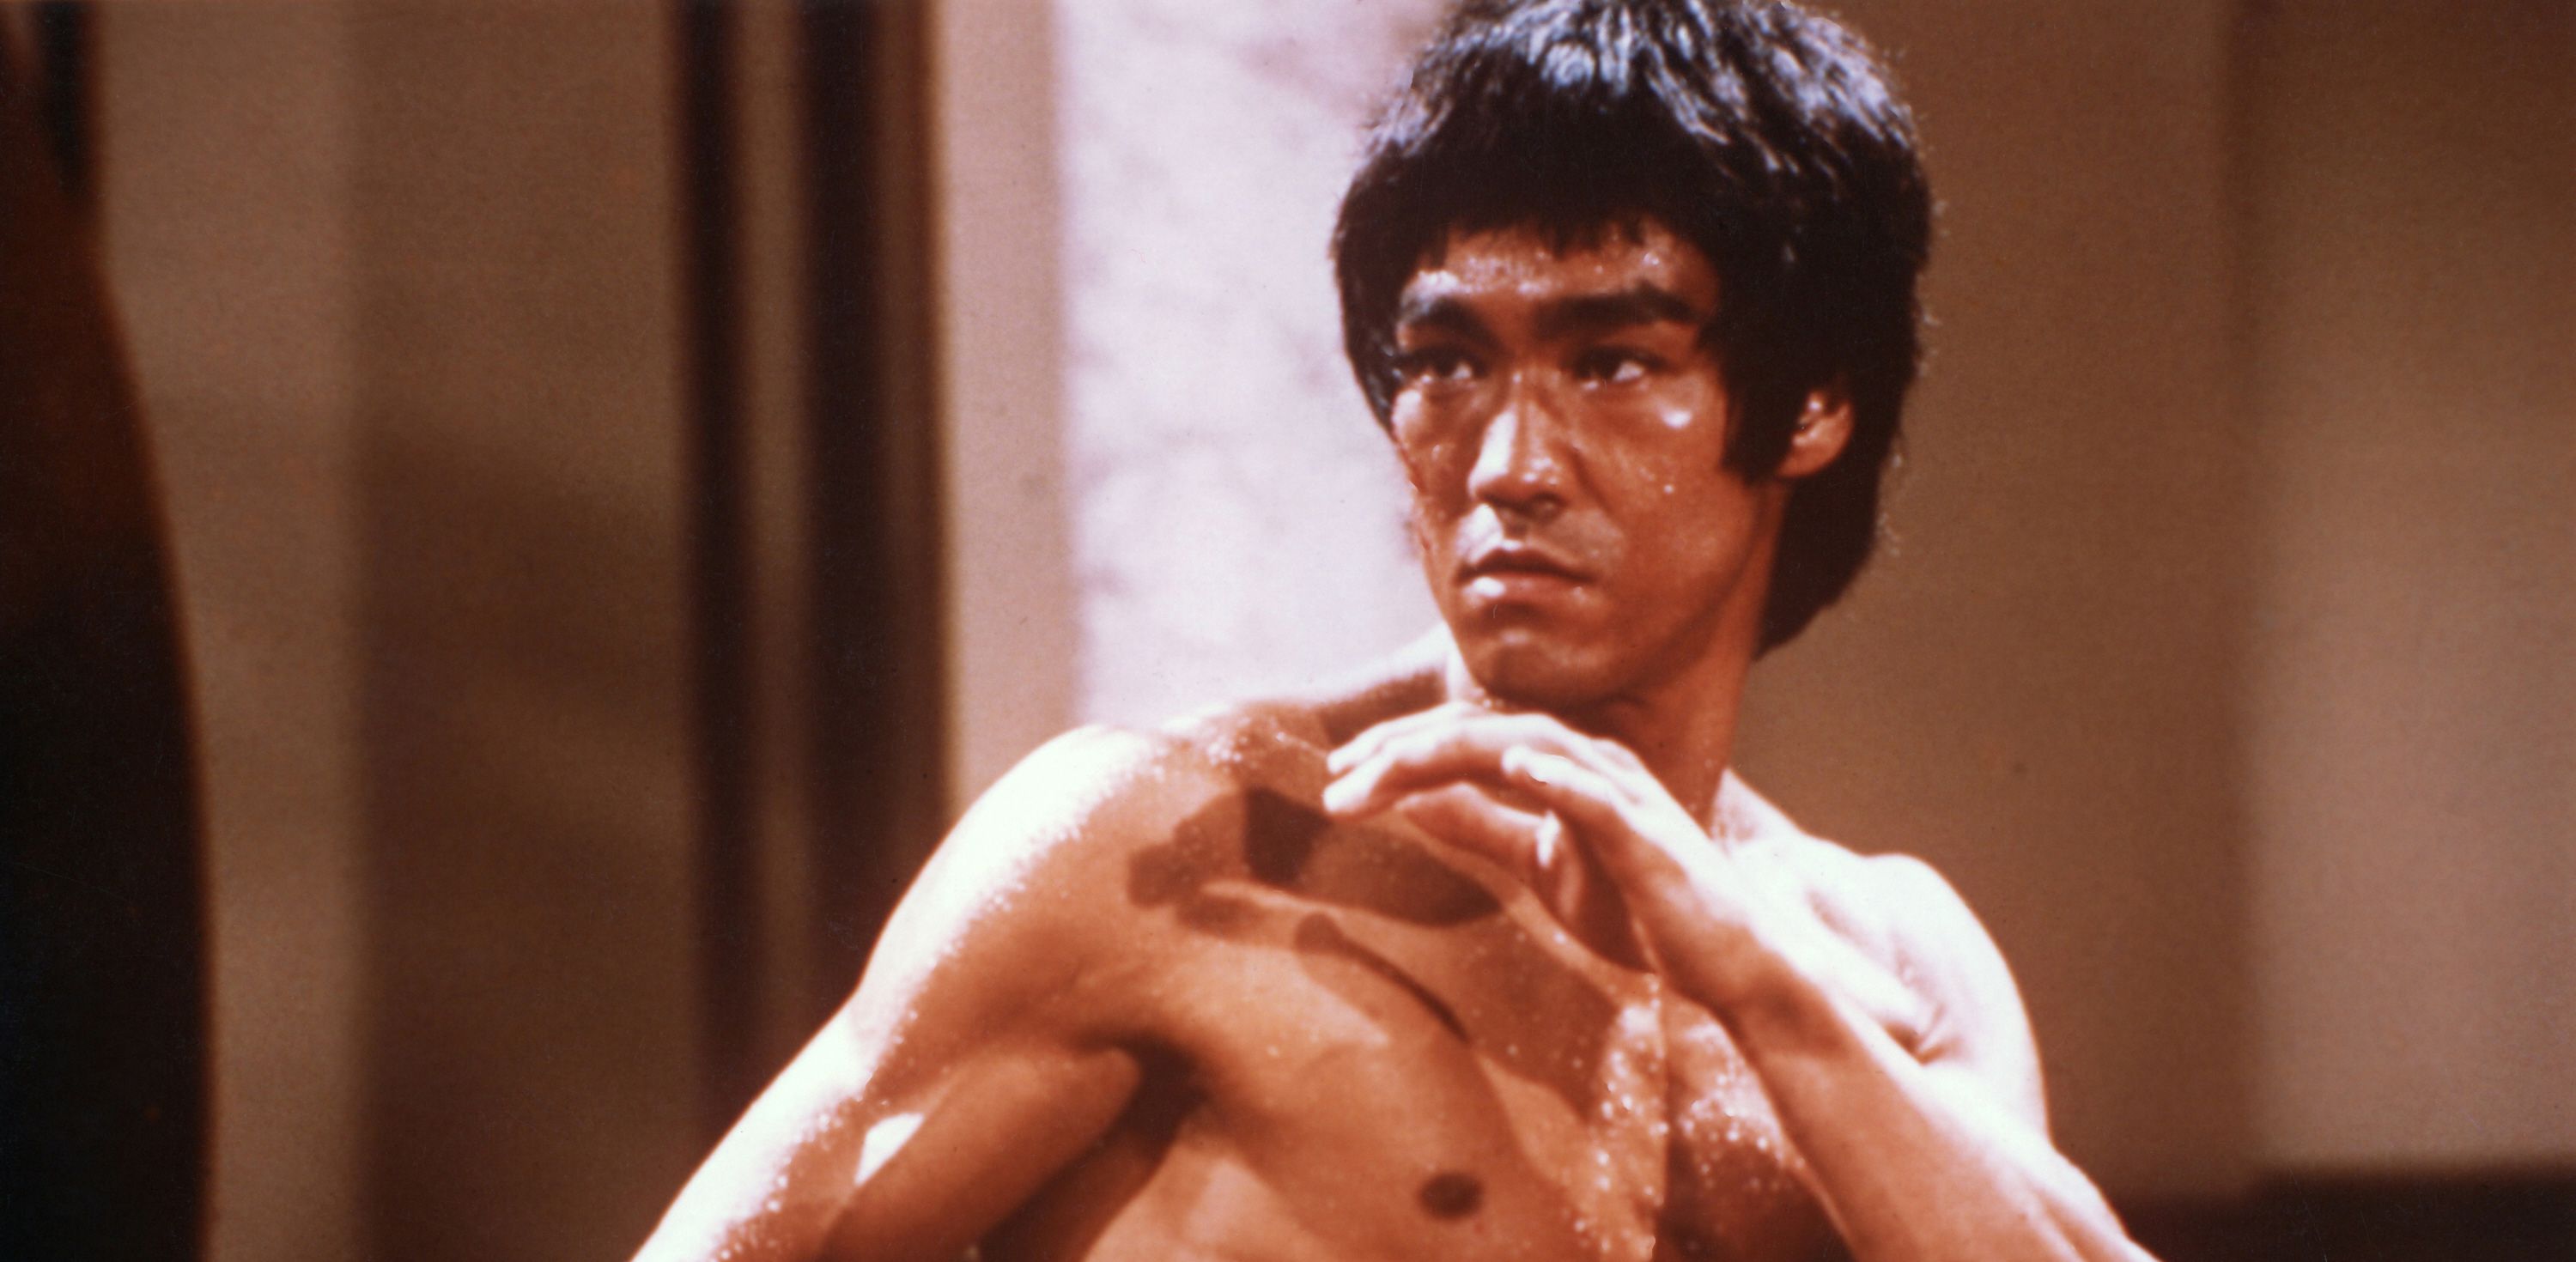 Nice Images Collection: Enter The Dragon Desktop Wallpapers